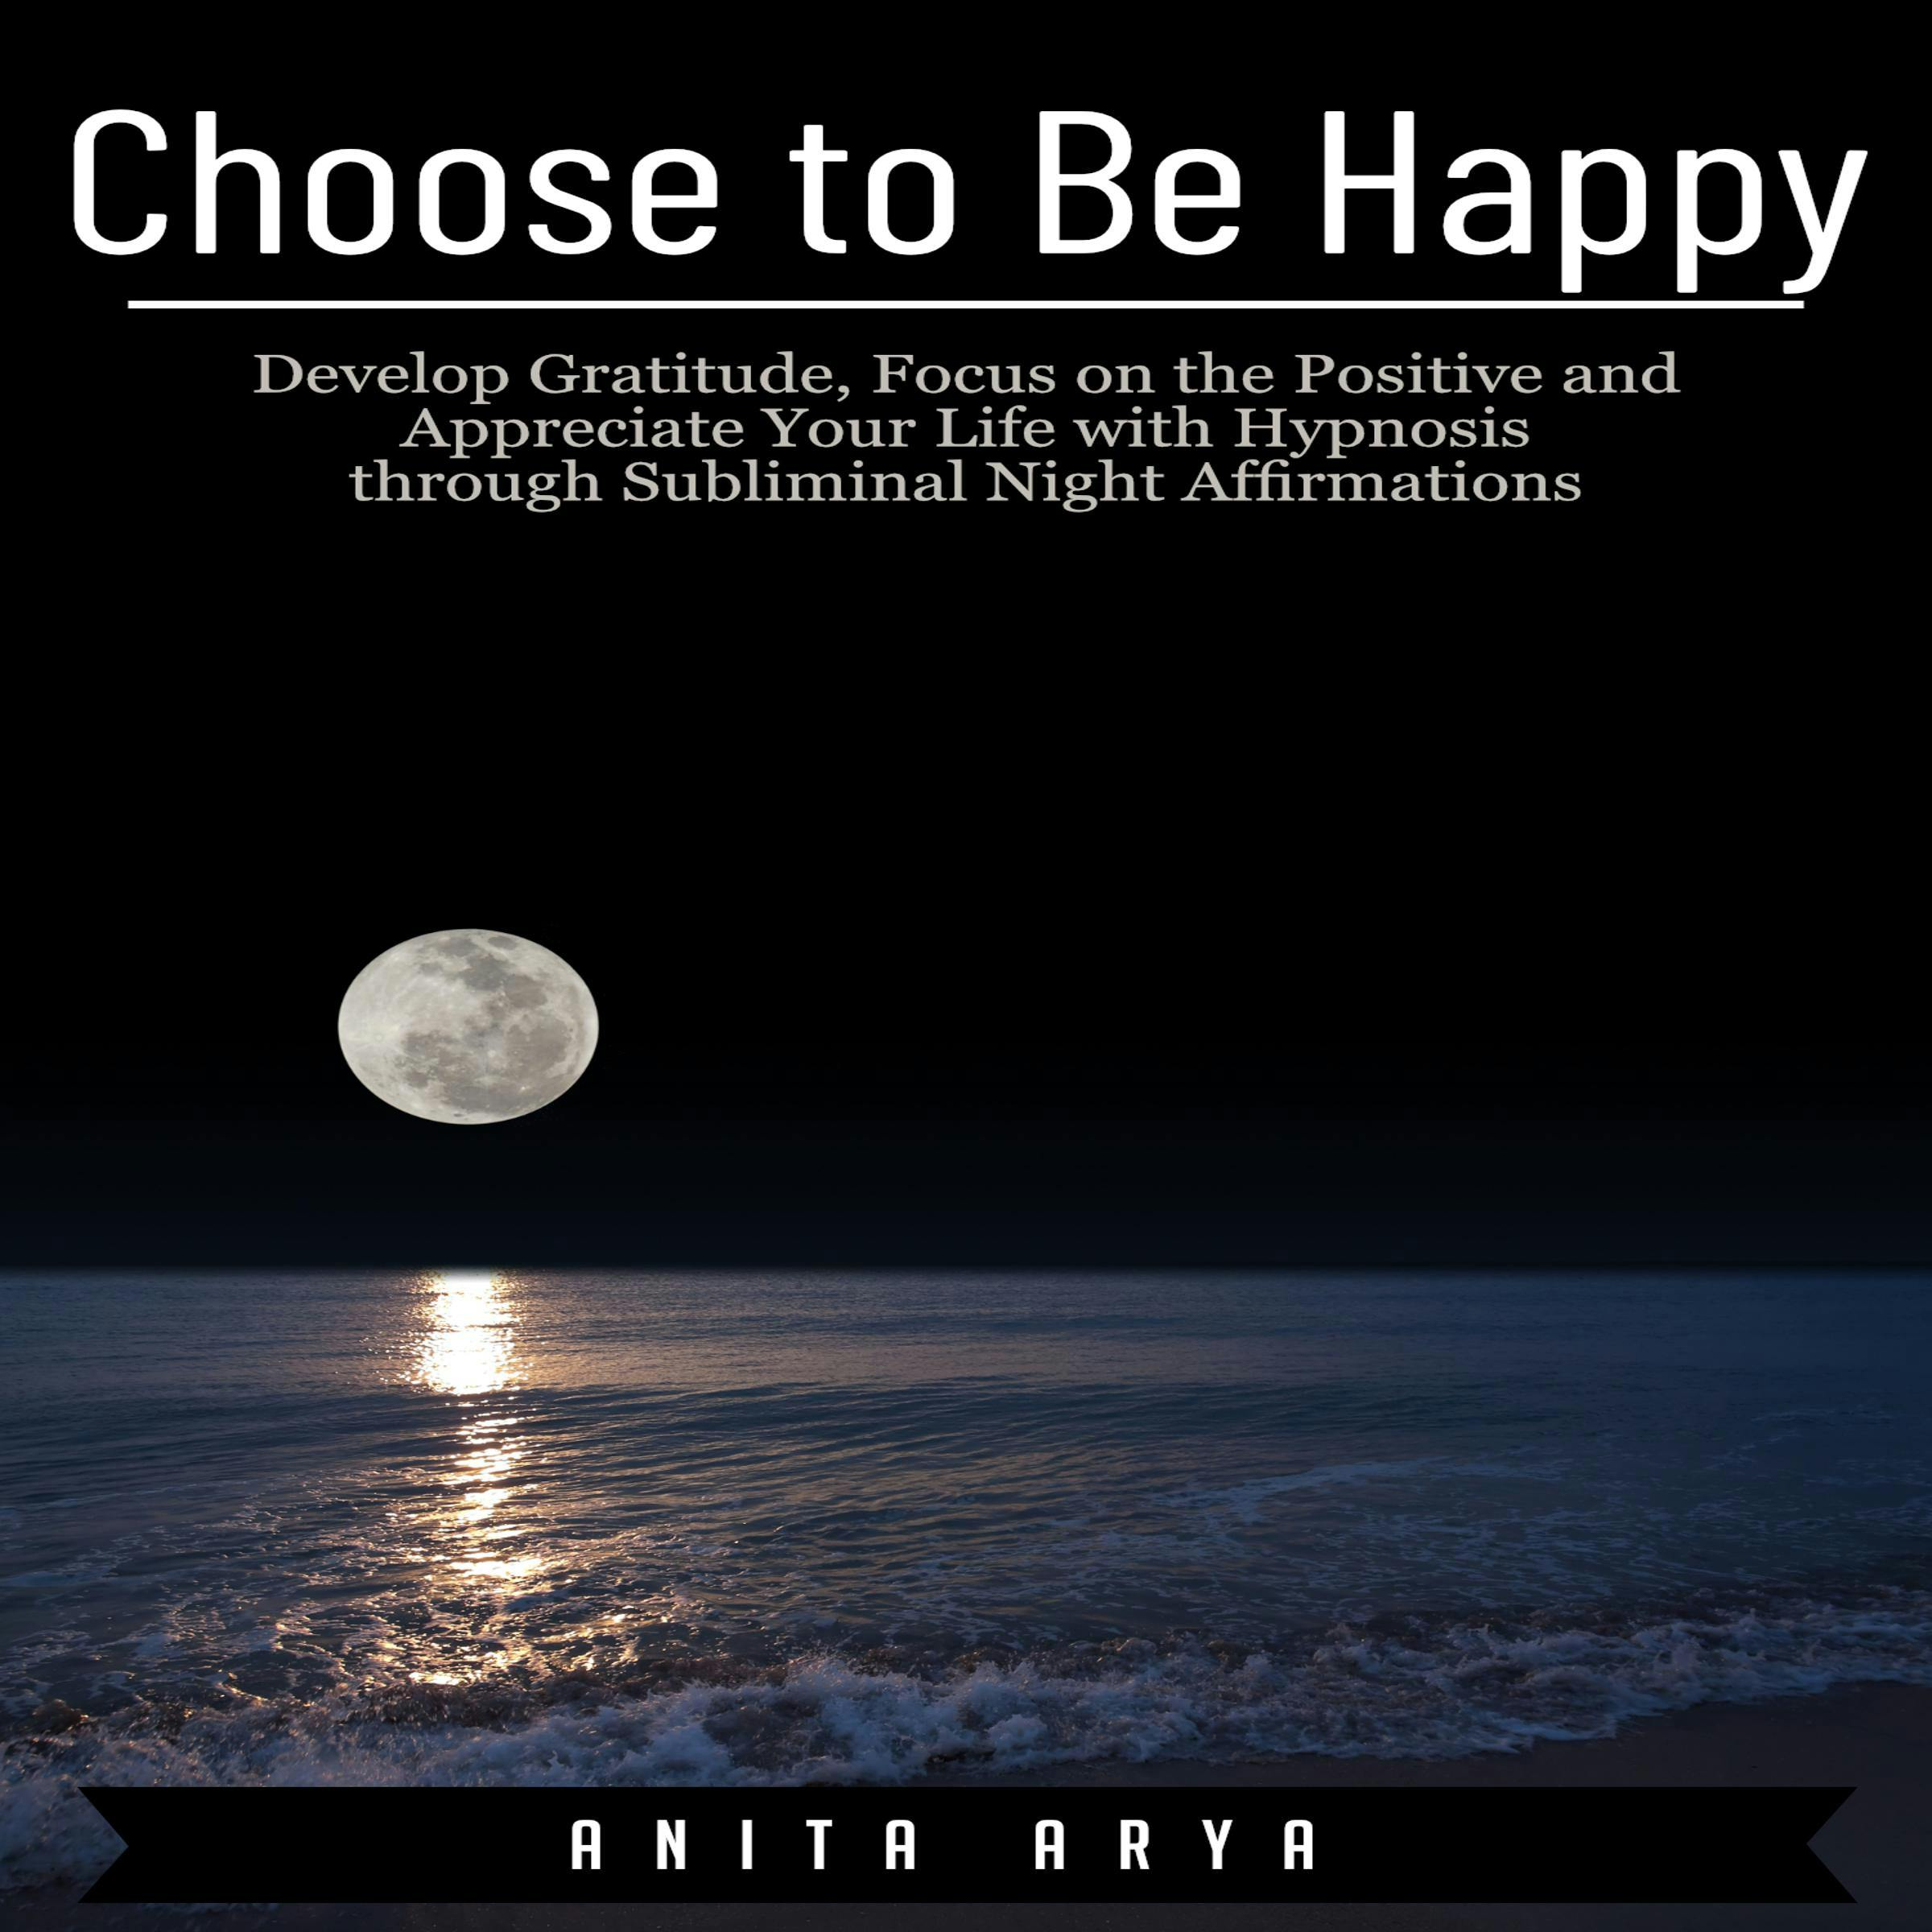 Choose to Be Happy: Develop Gratitude, Focus on the Positive and Appreciate Your Life with Hypnosis through Subliminal Night Affirmations - Anita Arya